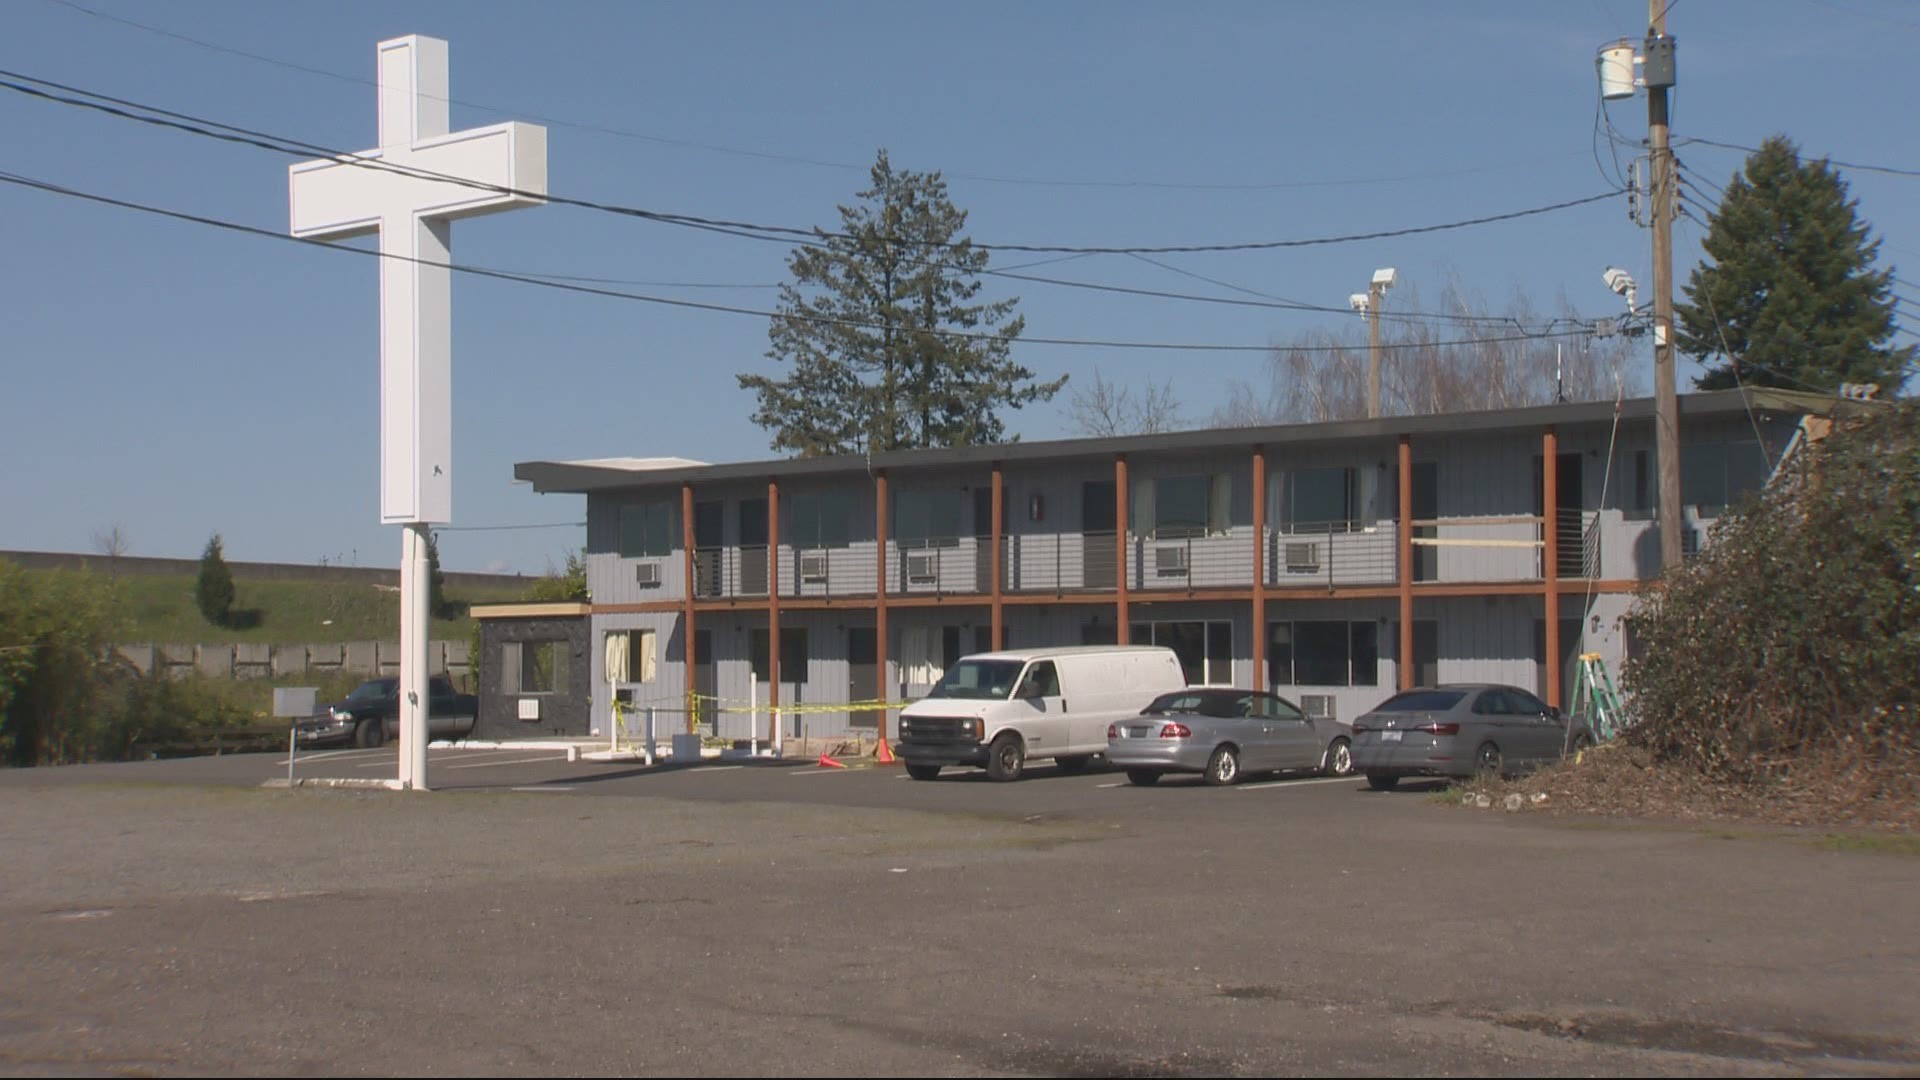 An old motel known for drugs and crimes is becoming a safe place for people to live and recover from addiction. Tim Gordon has the story.